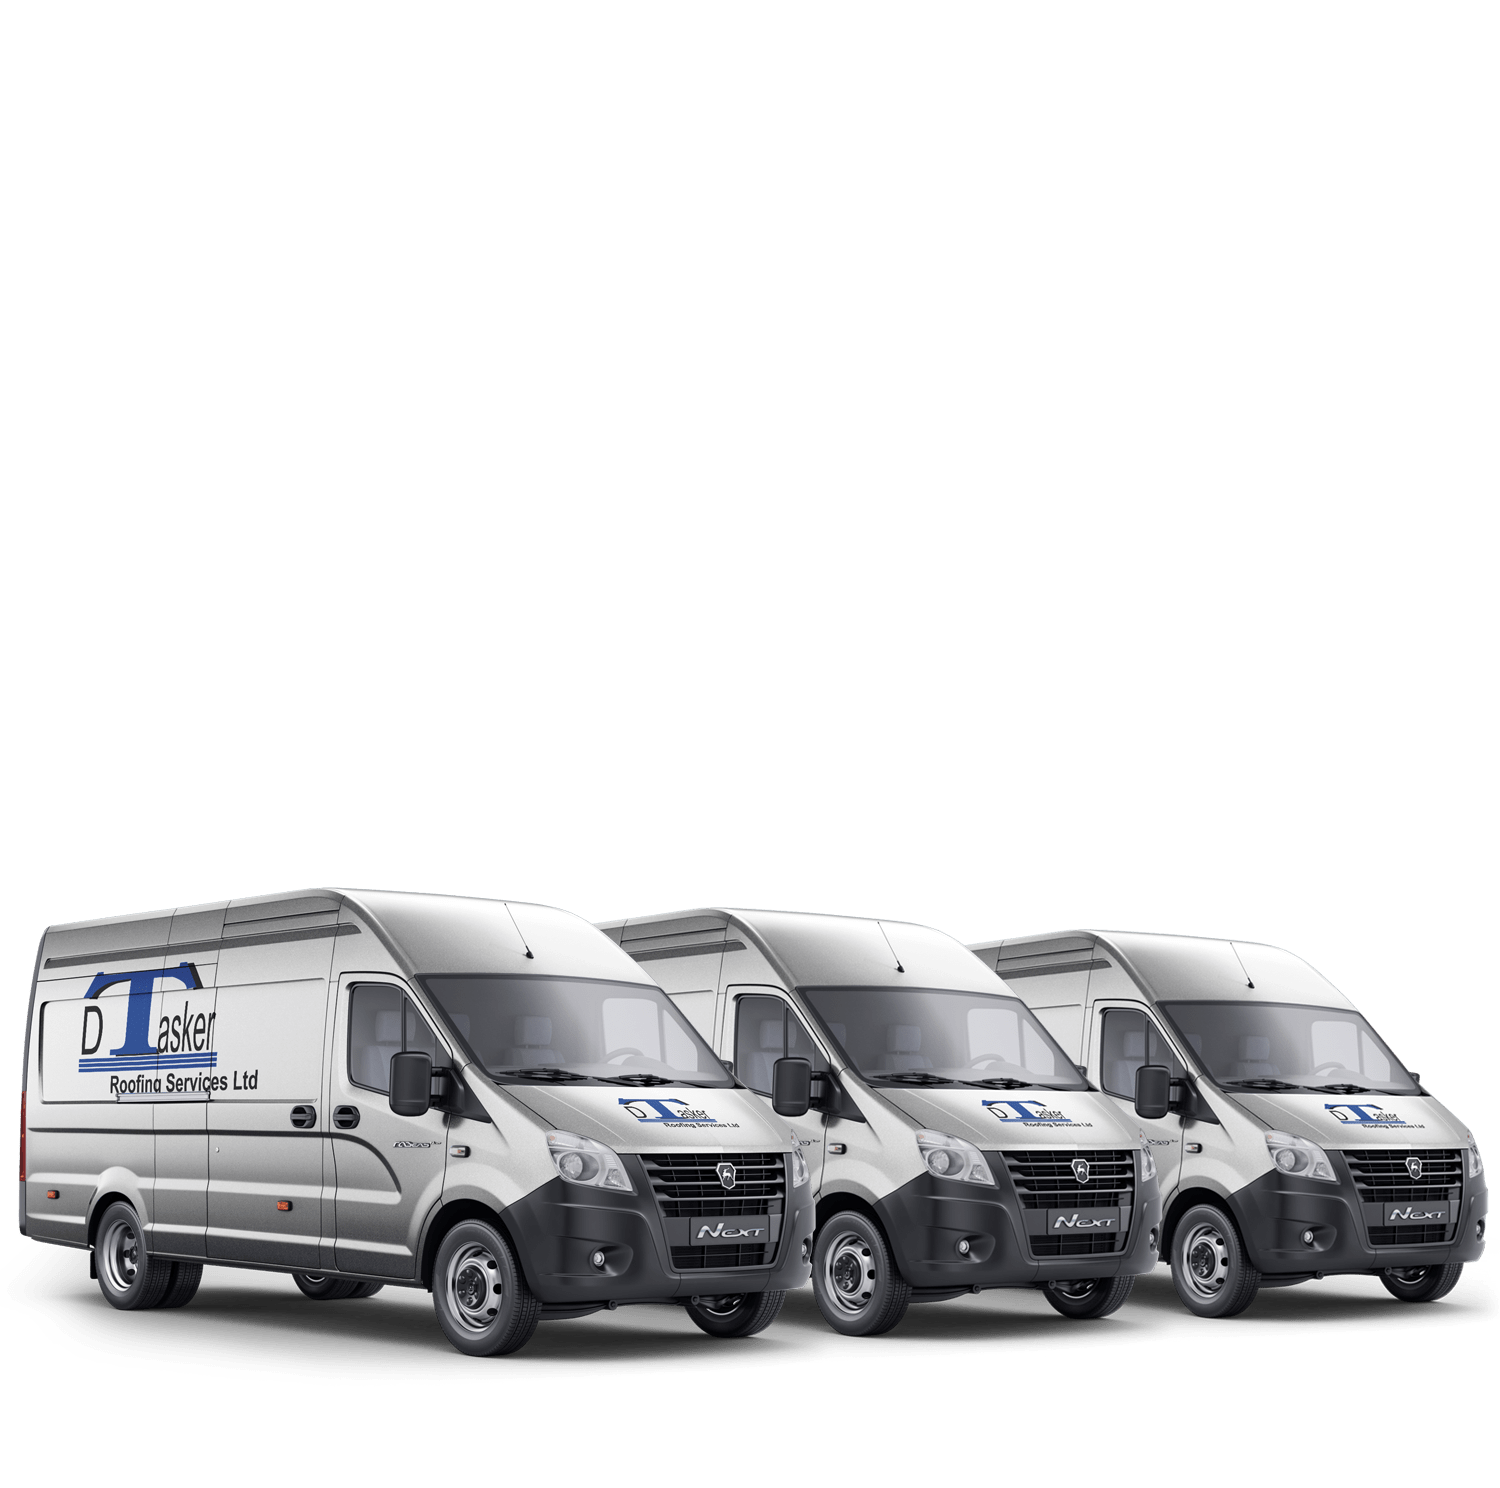 Three vans with the D Tasker Roofing logo on the front and side